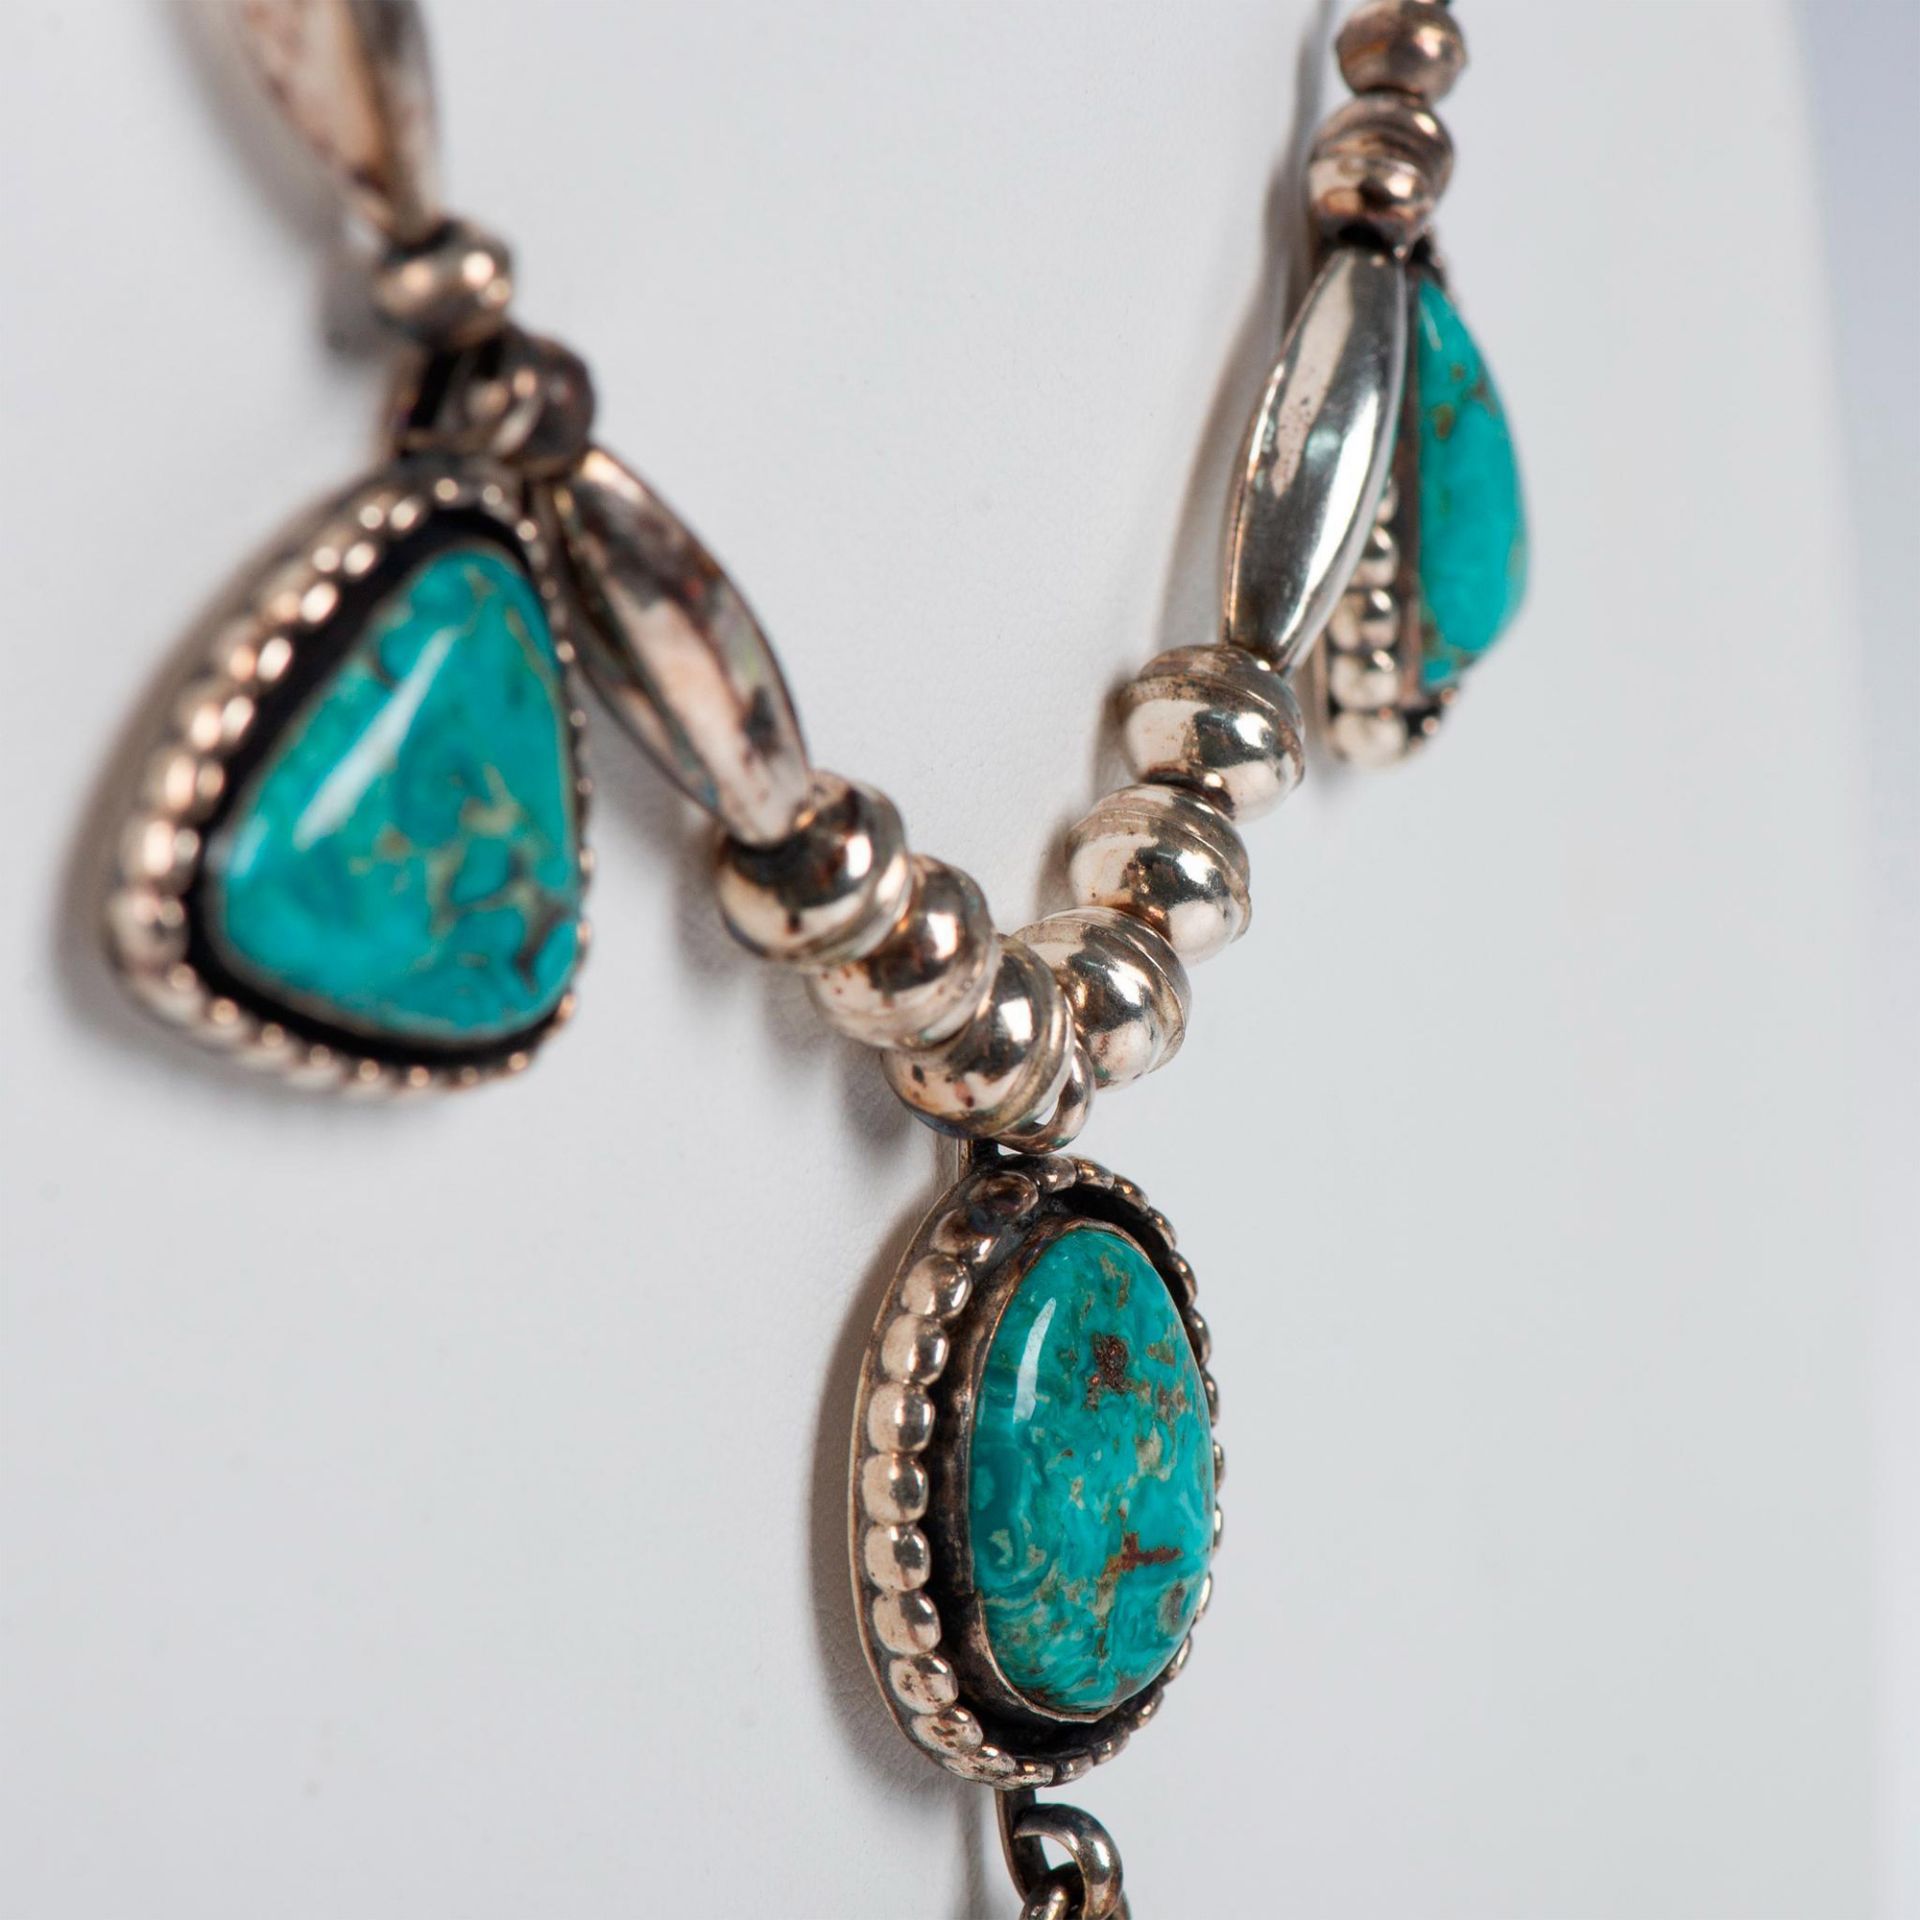 Pretty Native American Sterling Silver & Turquoise Necklace - Image 3 of 4